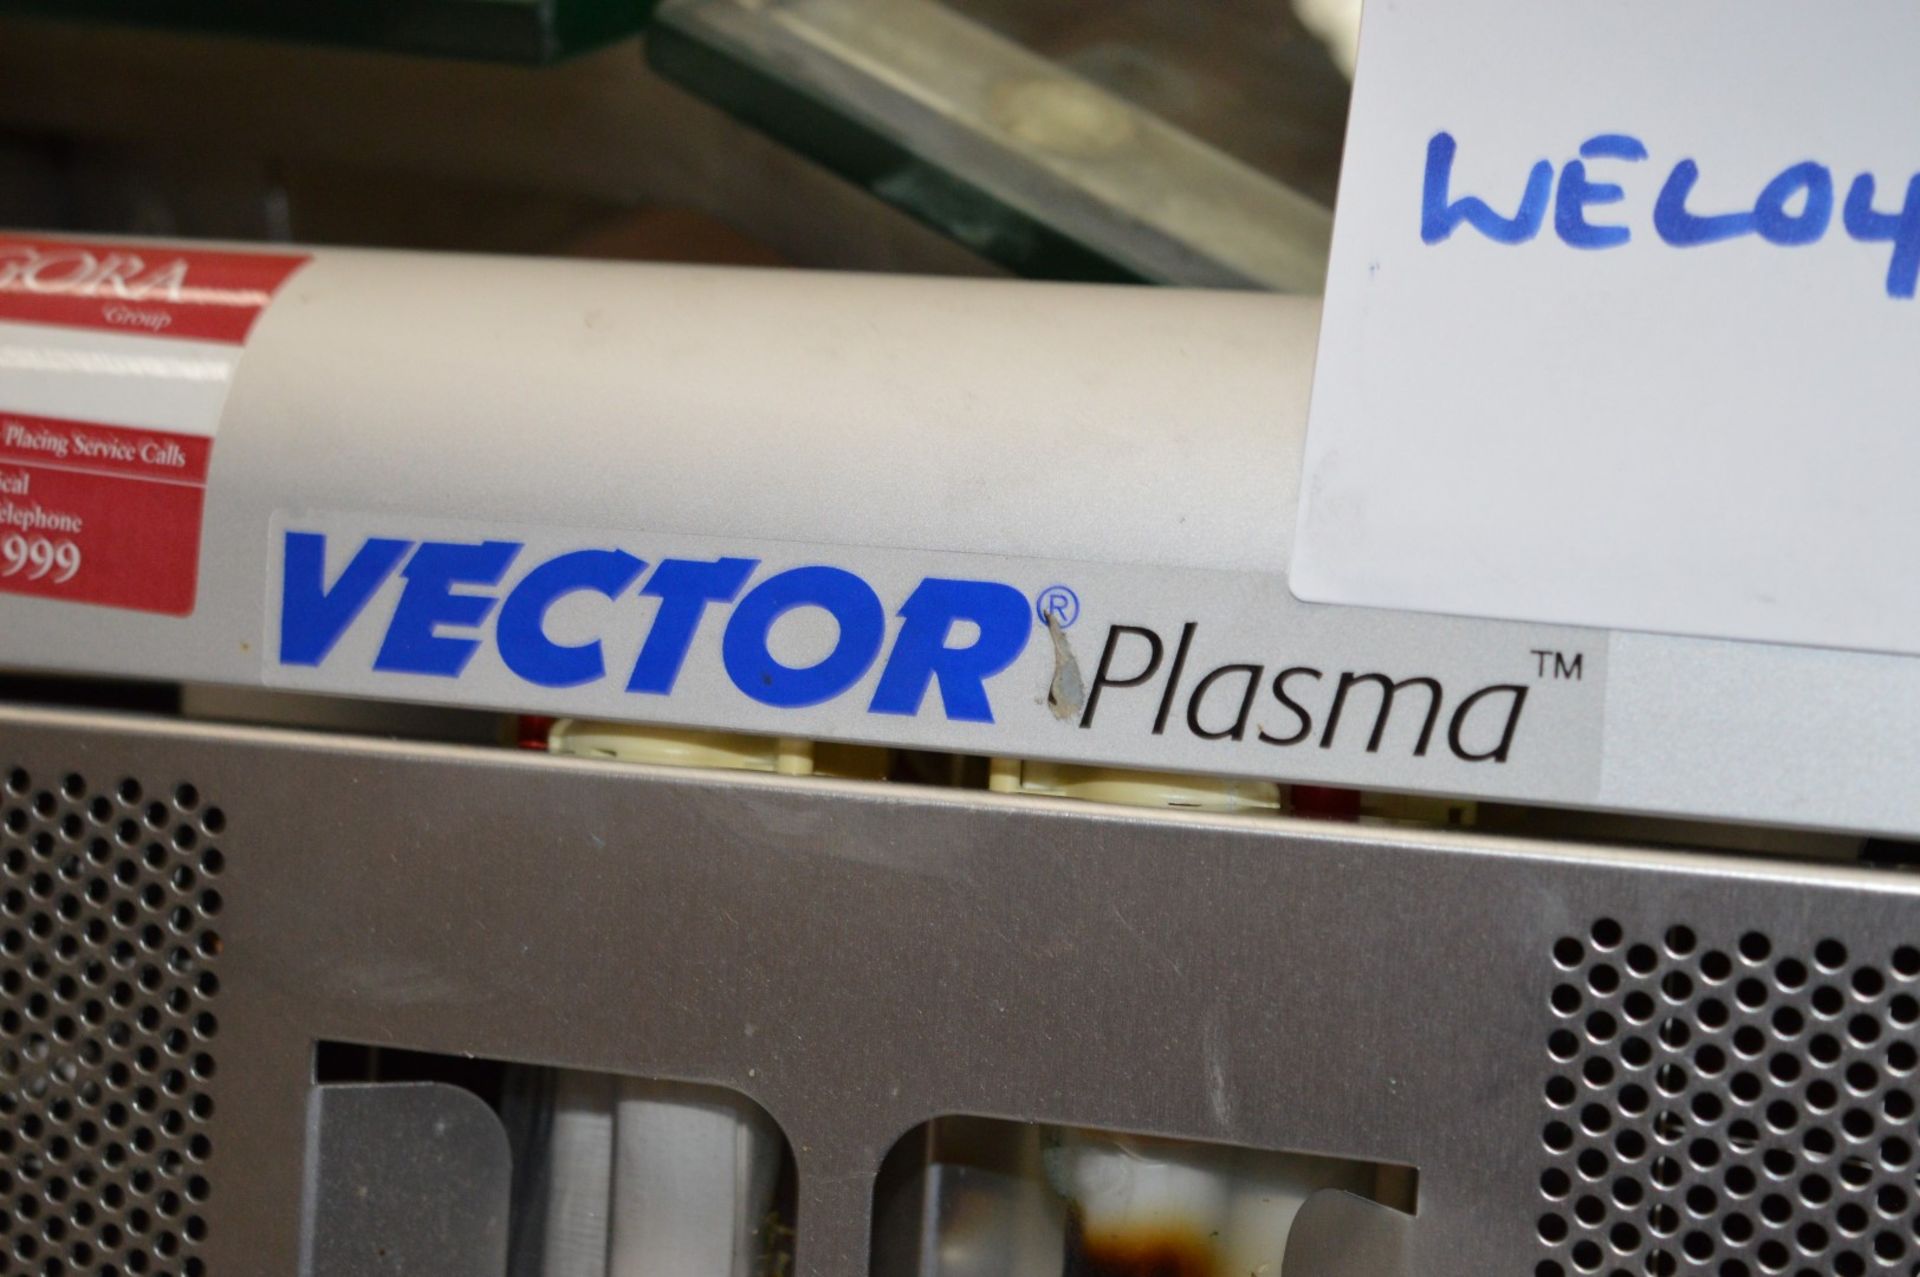 1 x Vector Pest Plasma - For use in Commercial Storage Areas, Commercial Kitches, Back of House - Image 2 of 2